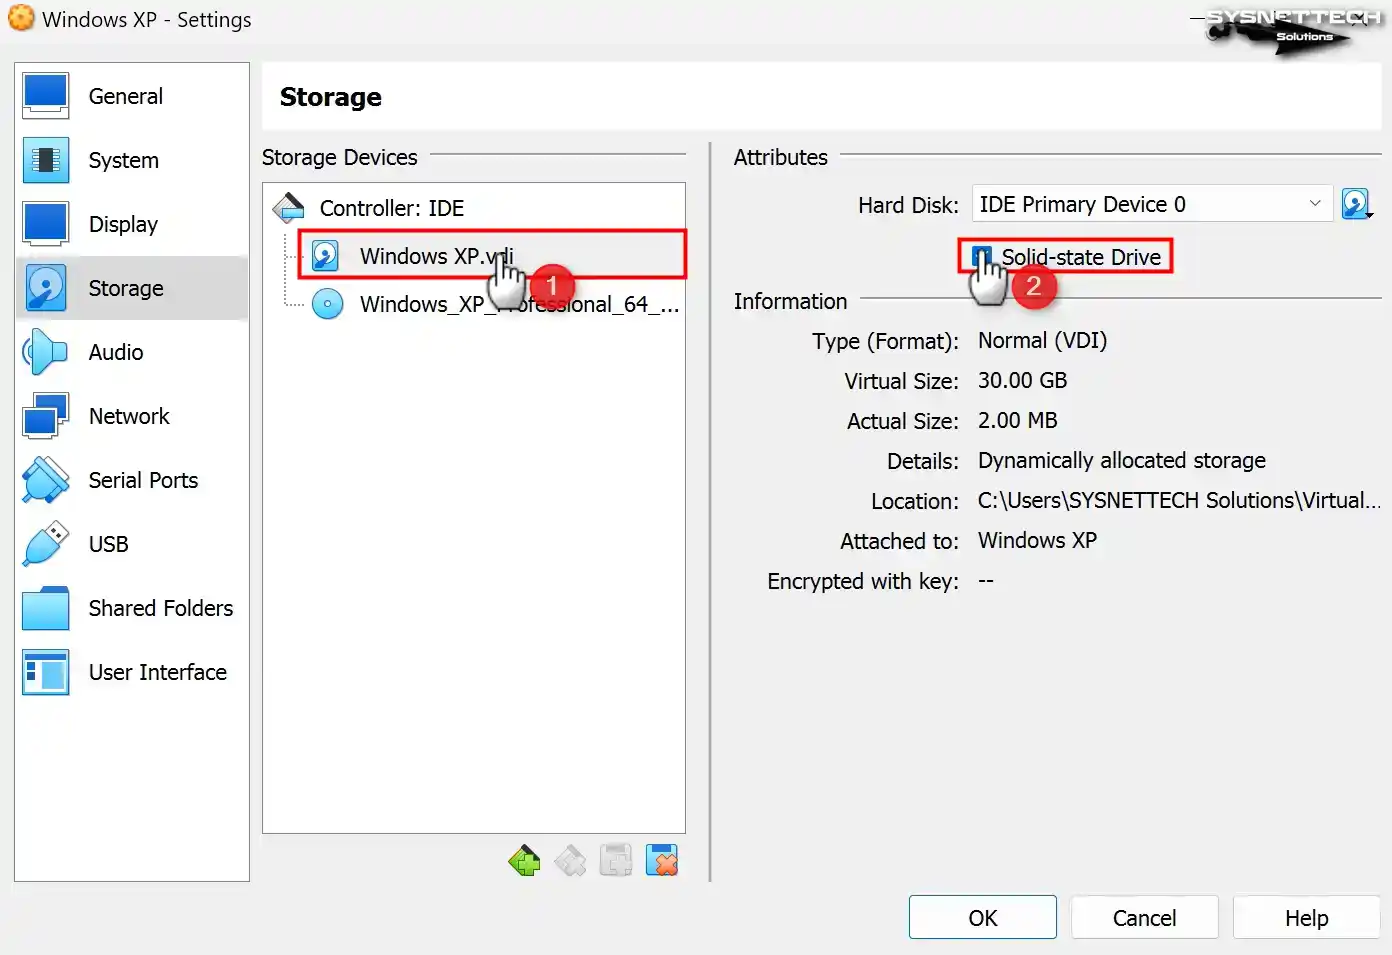 Configuring VDI Disk as SSD